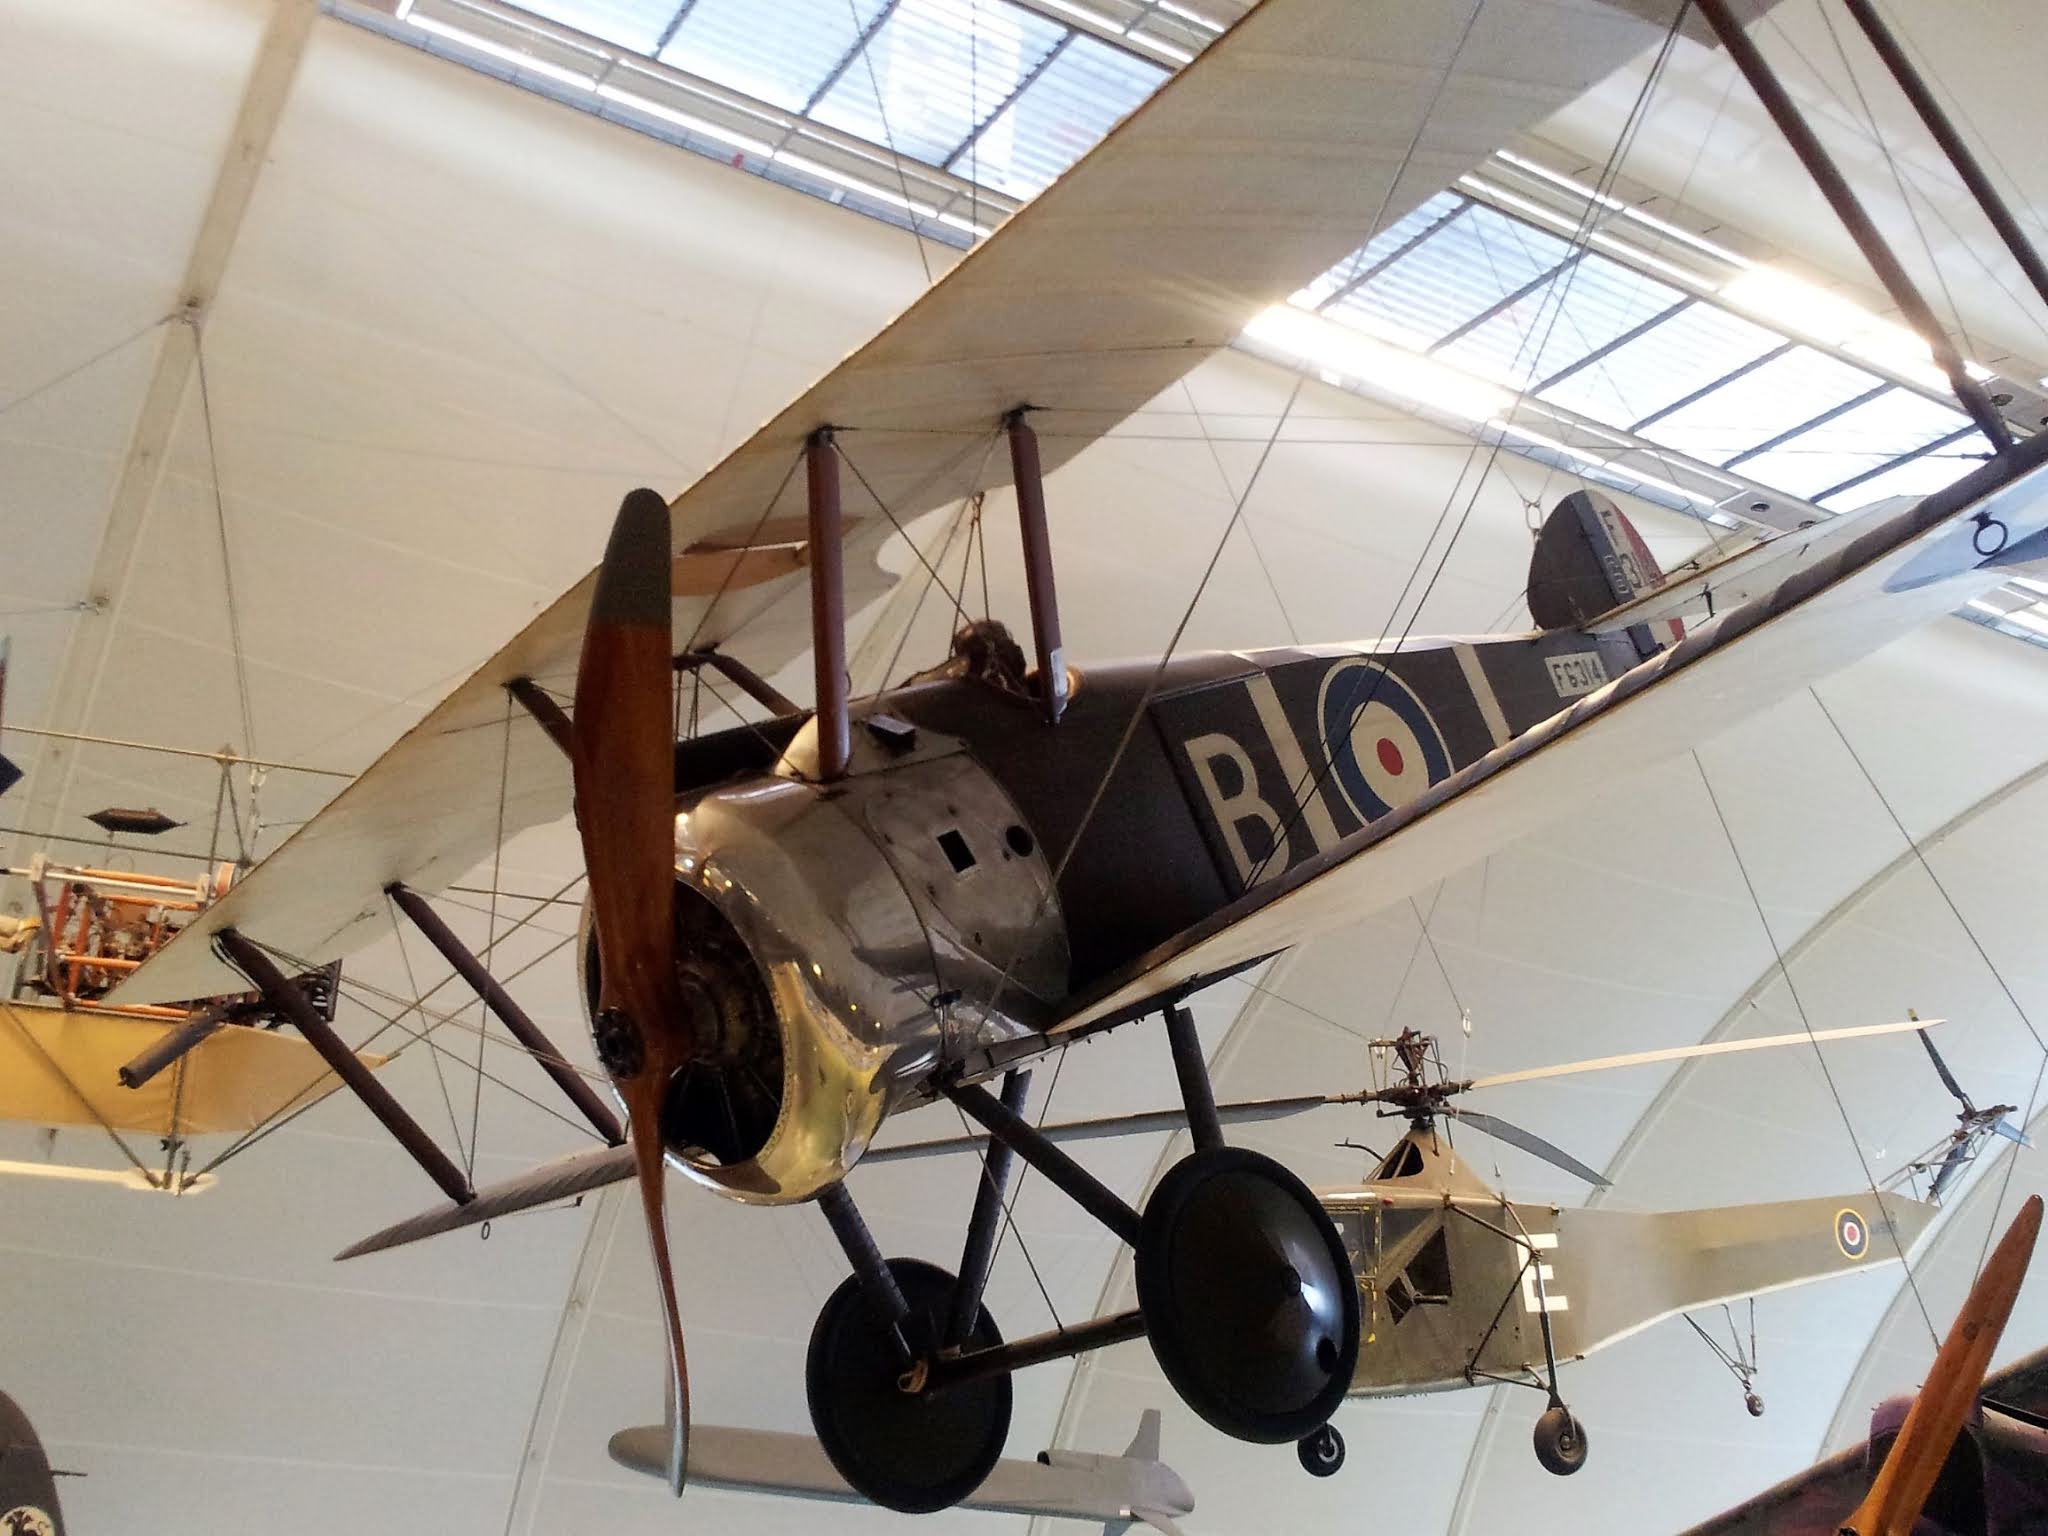 A plane from the First World War.